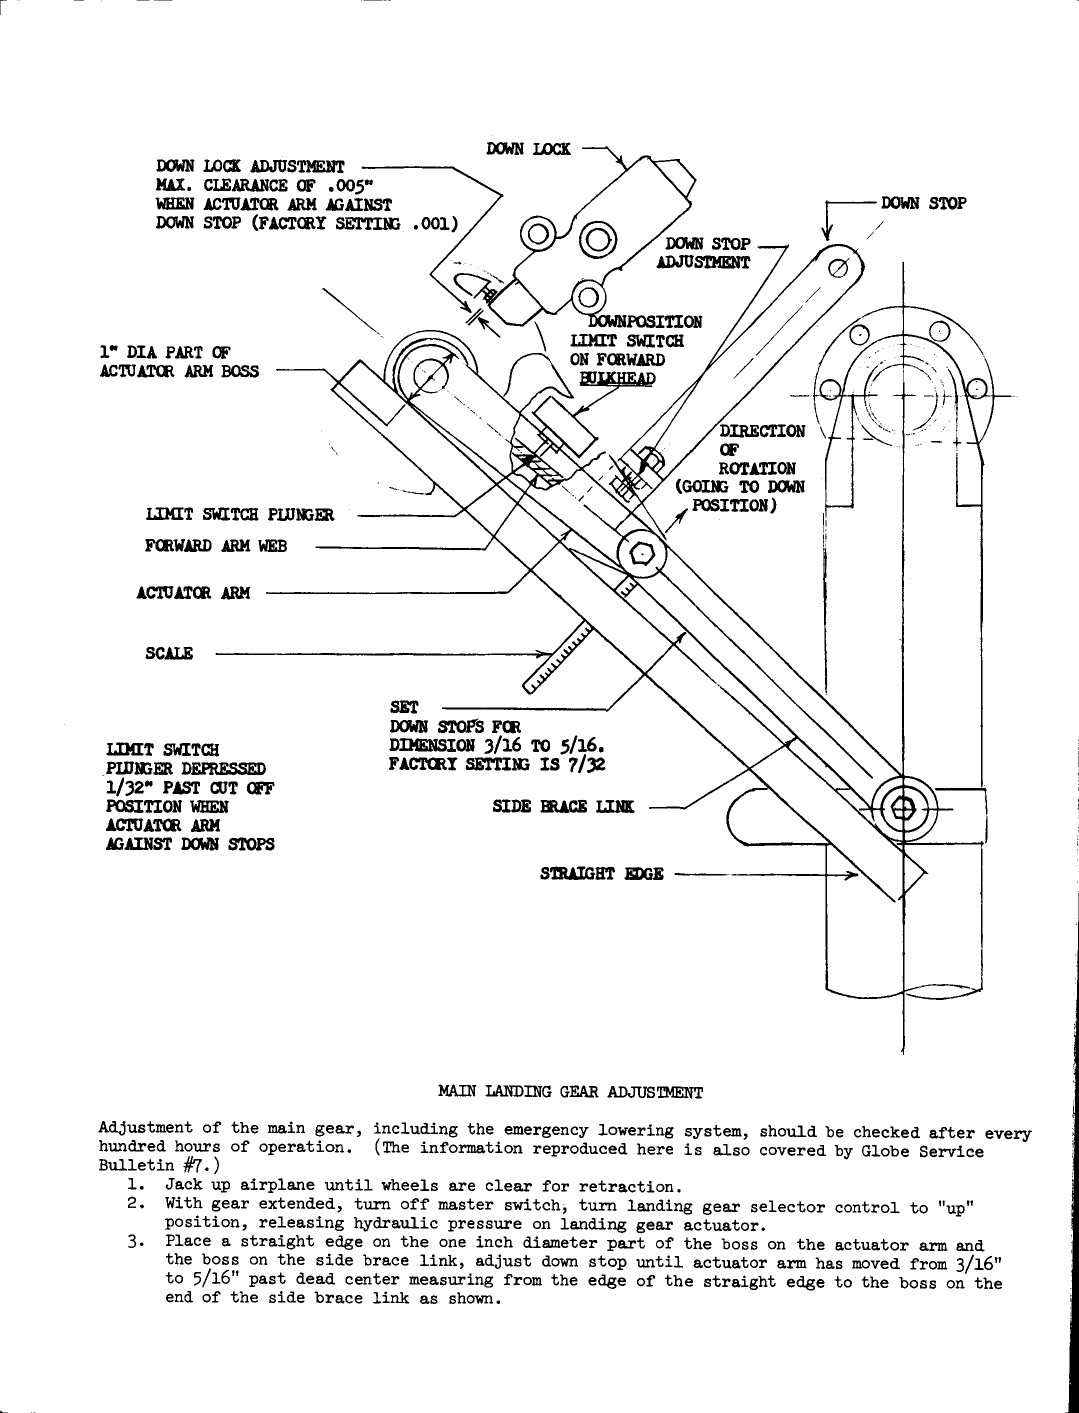 Sample page 8 from AirCorps Library document: The Swift Hydraulic Manual